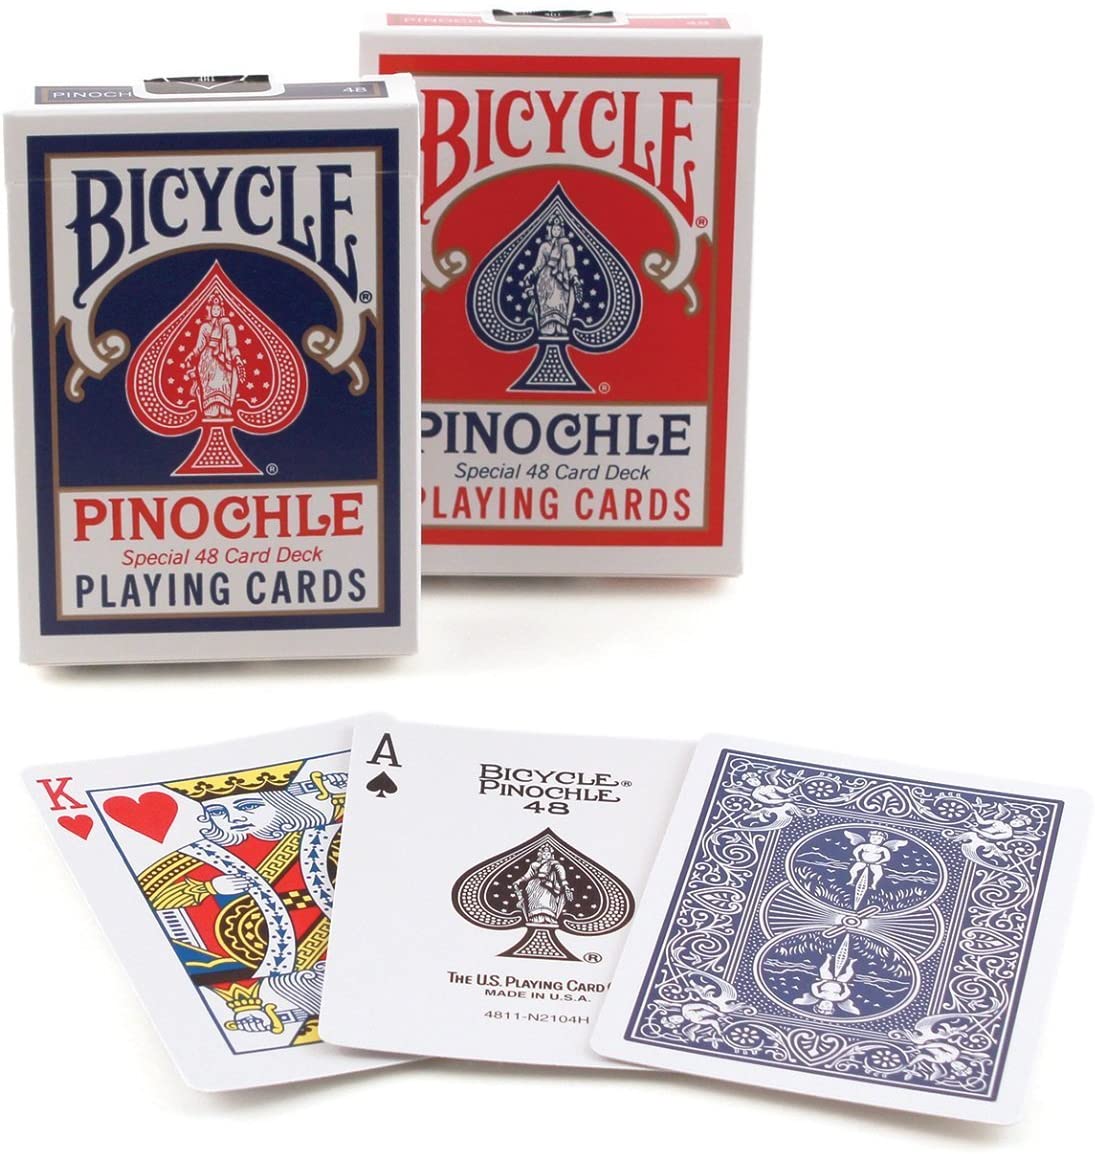 Bicycle: Pinochle